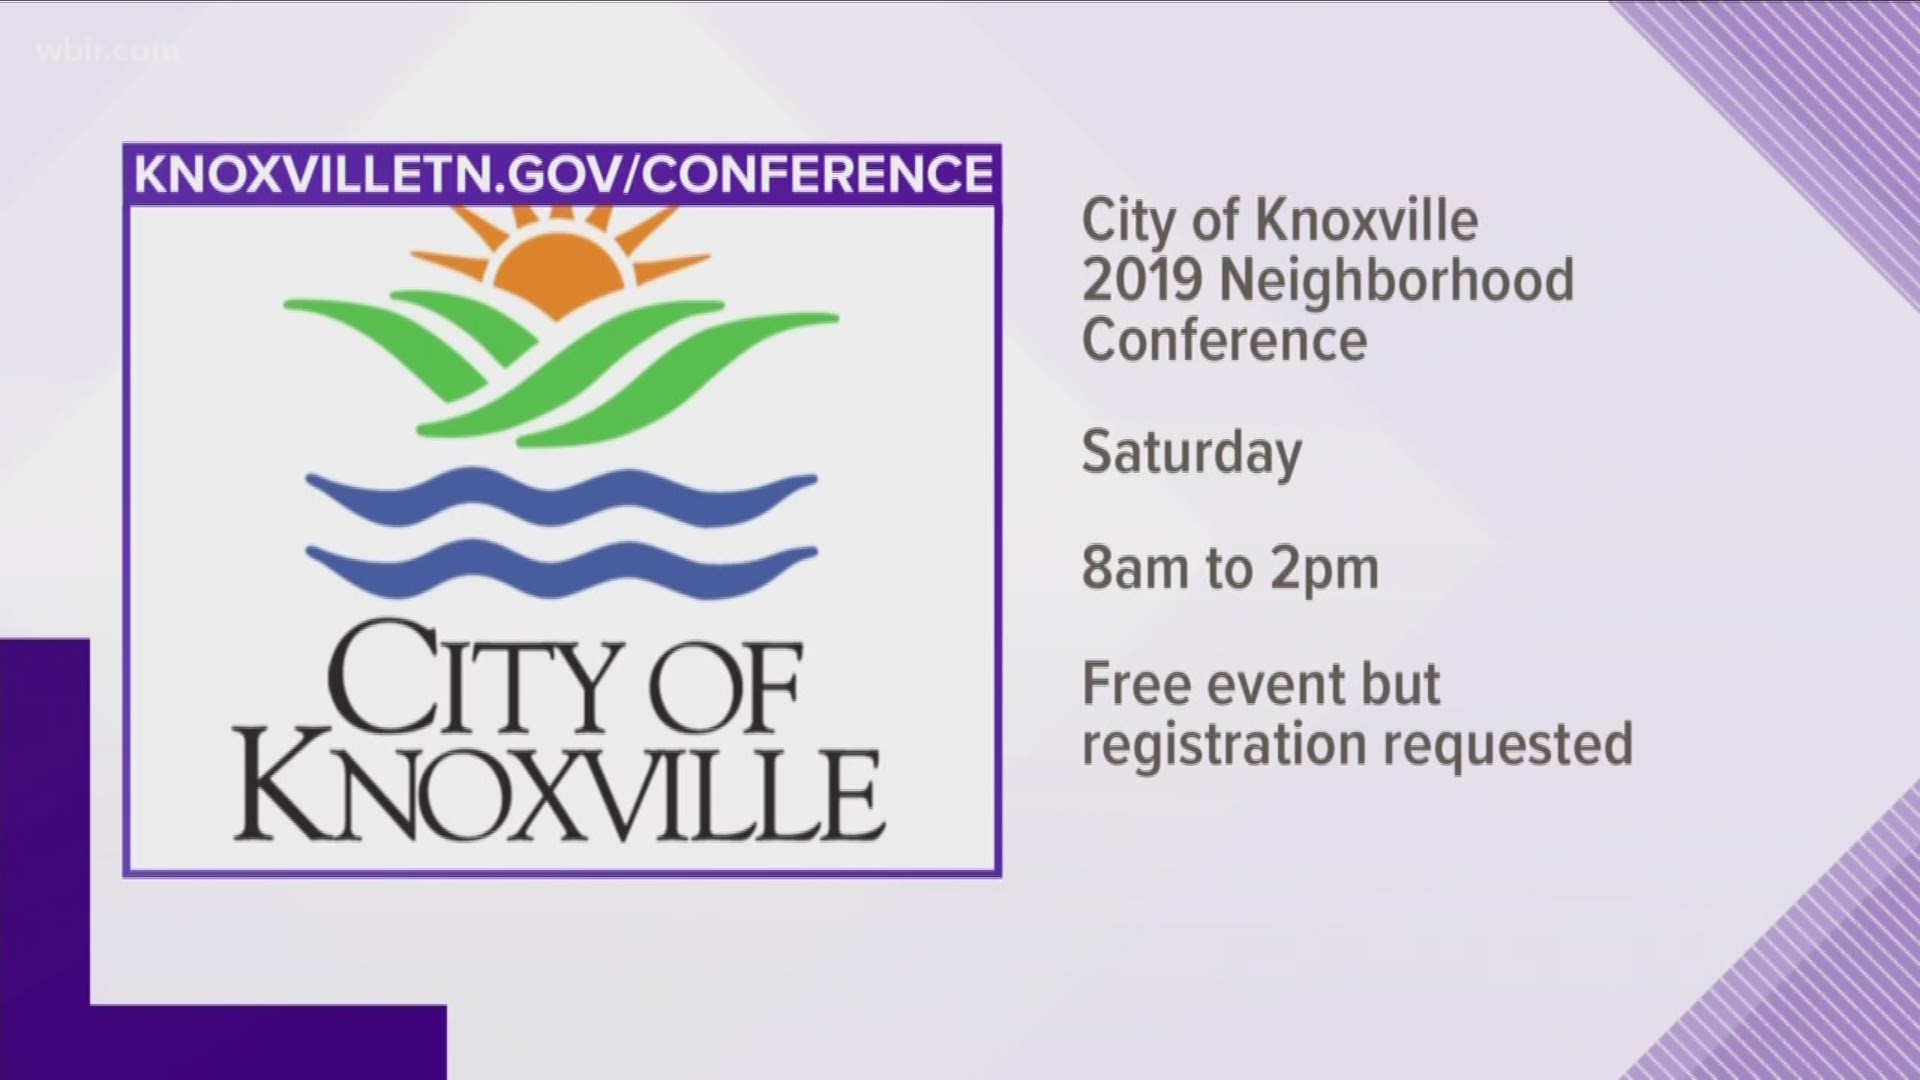 The city of Knoxville invites residents interested in maintaining or improving quality of life in their neighborhoods to attend their Neighborhood conference on May 18 at the Knoxville Convention Center. The conference runs 8am to 2pm and will include speakers, exhibitors and public officials. It's a free event. Visit KnoxvilleTN.gov/conference to learn more. May 13, 2019-4pm